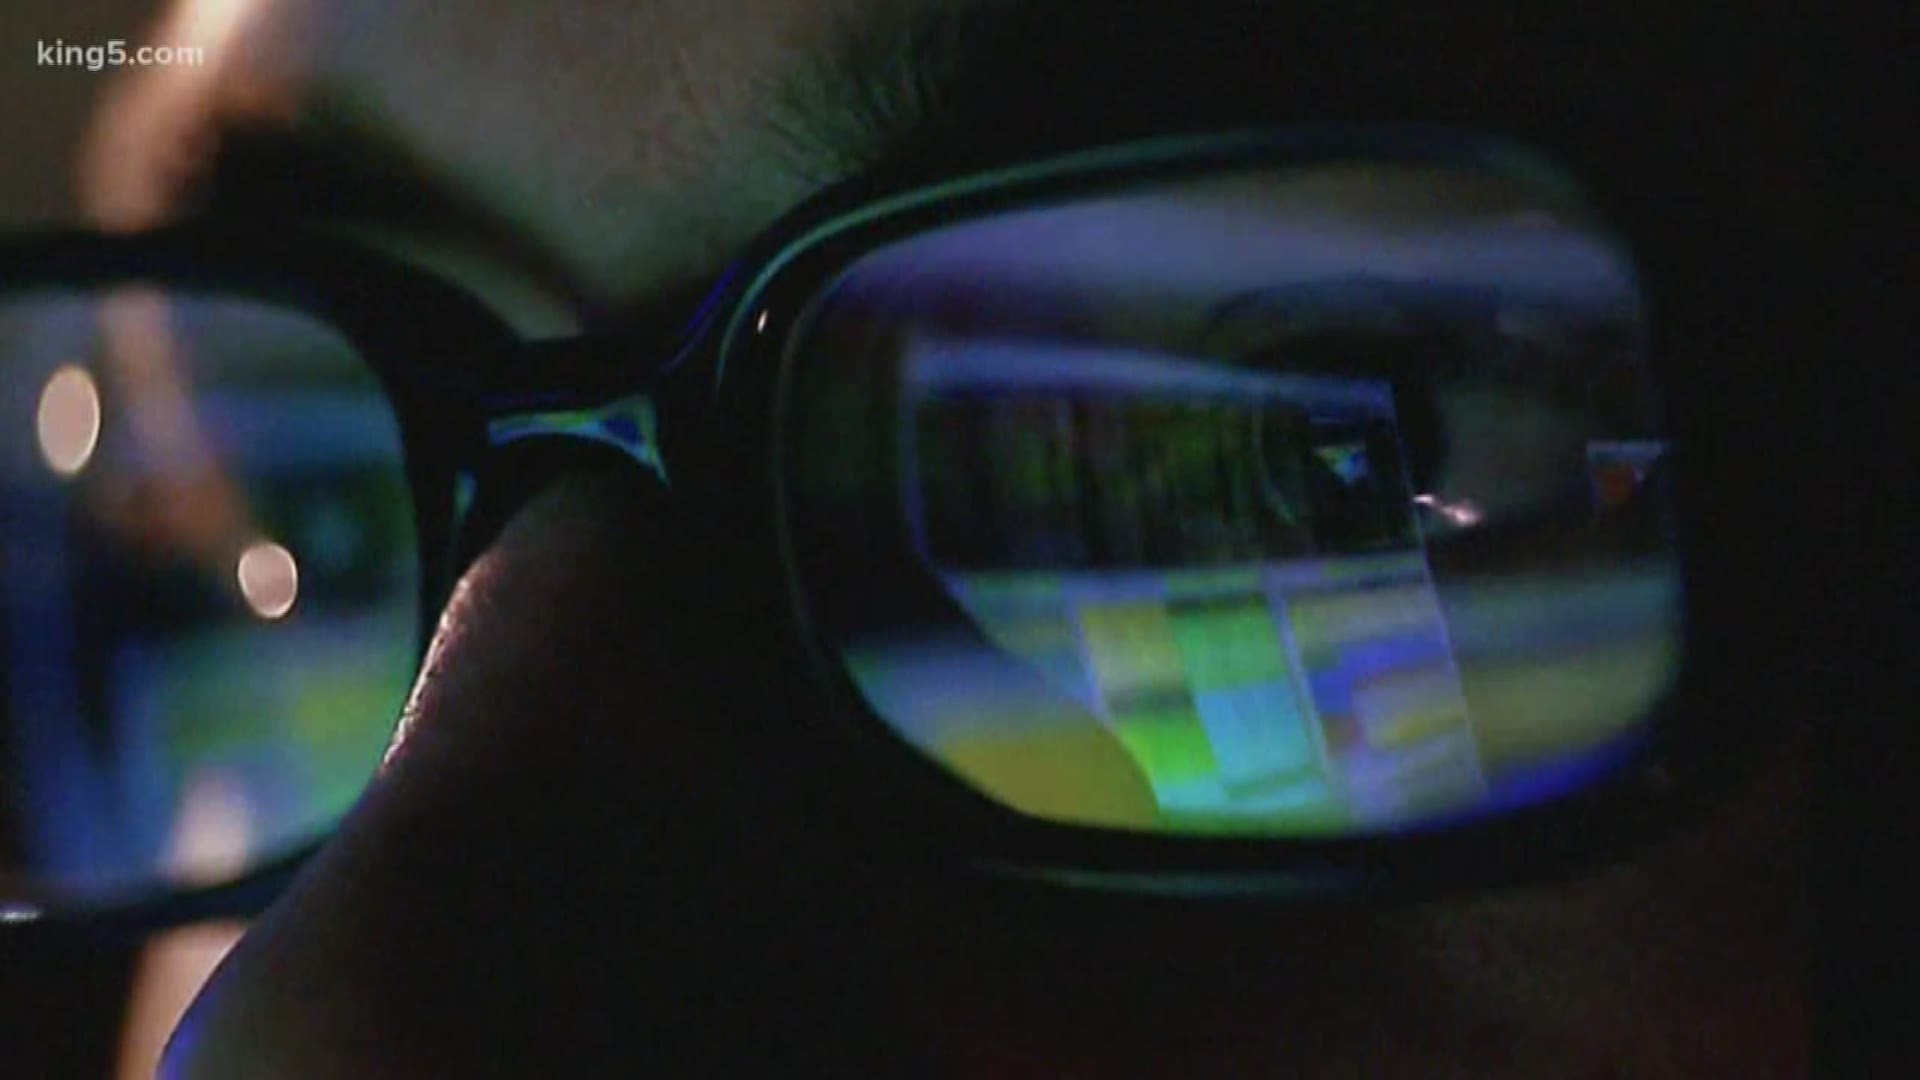 KING 5's Amy Moreno has more on what might be the next level in identity theft.